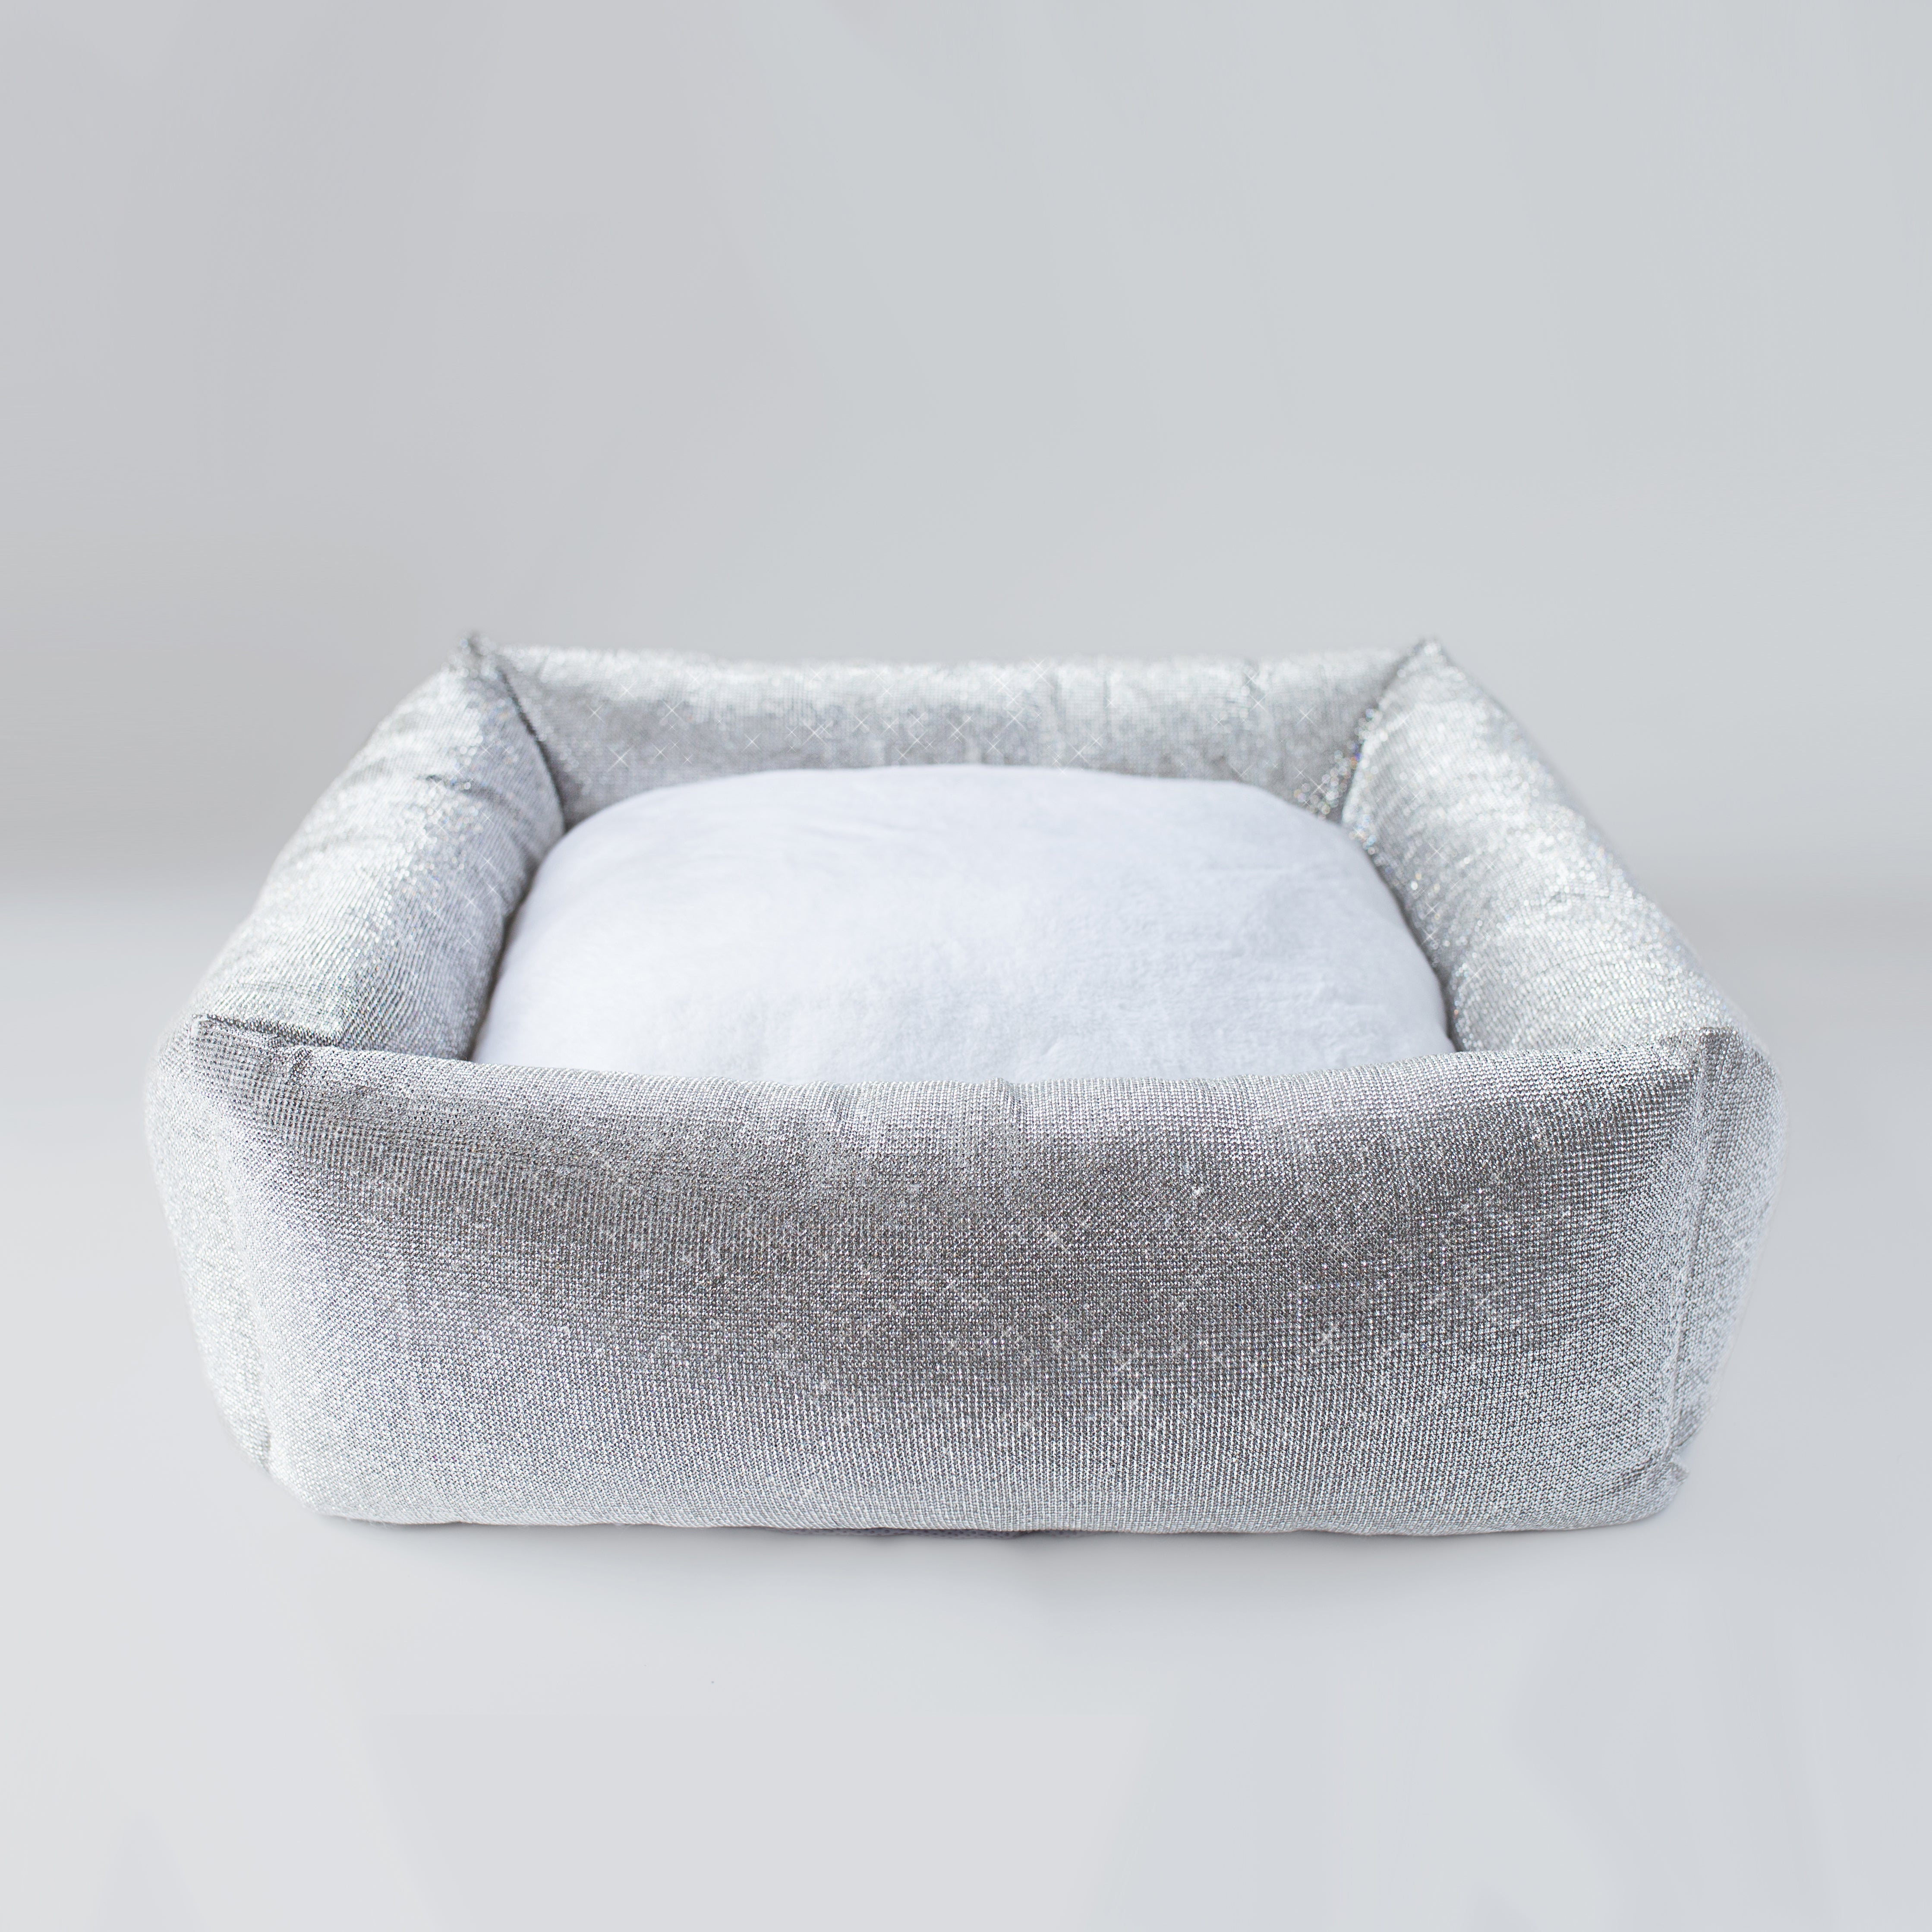 Pet Boutique - Dog Beds - Imperial Crystal Dog Bed by Hello Doggie